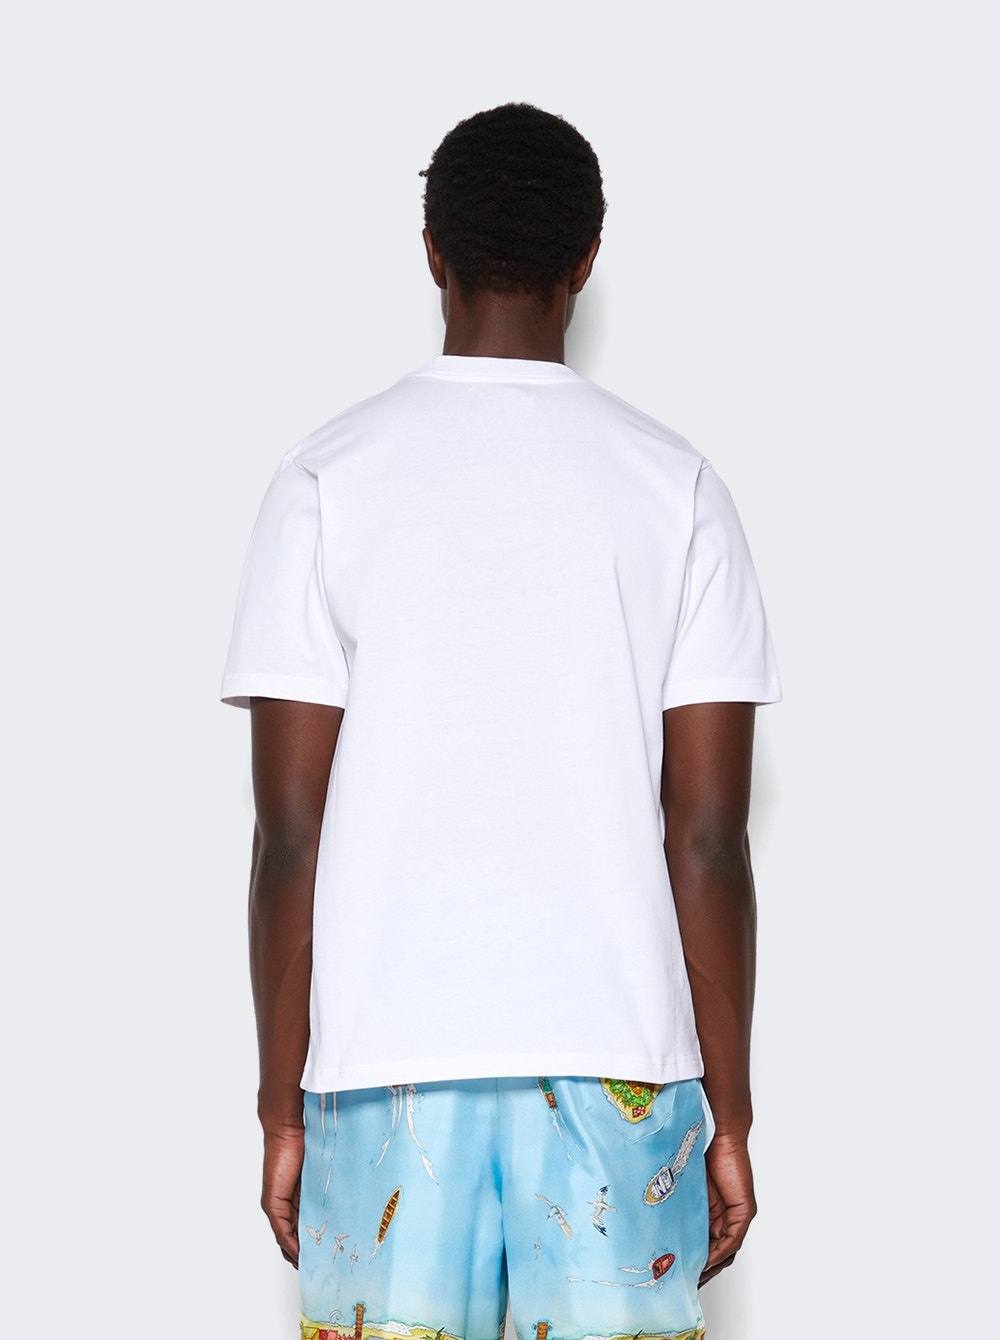 Afro Cubism Tennis Club Tee White - 5